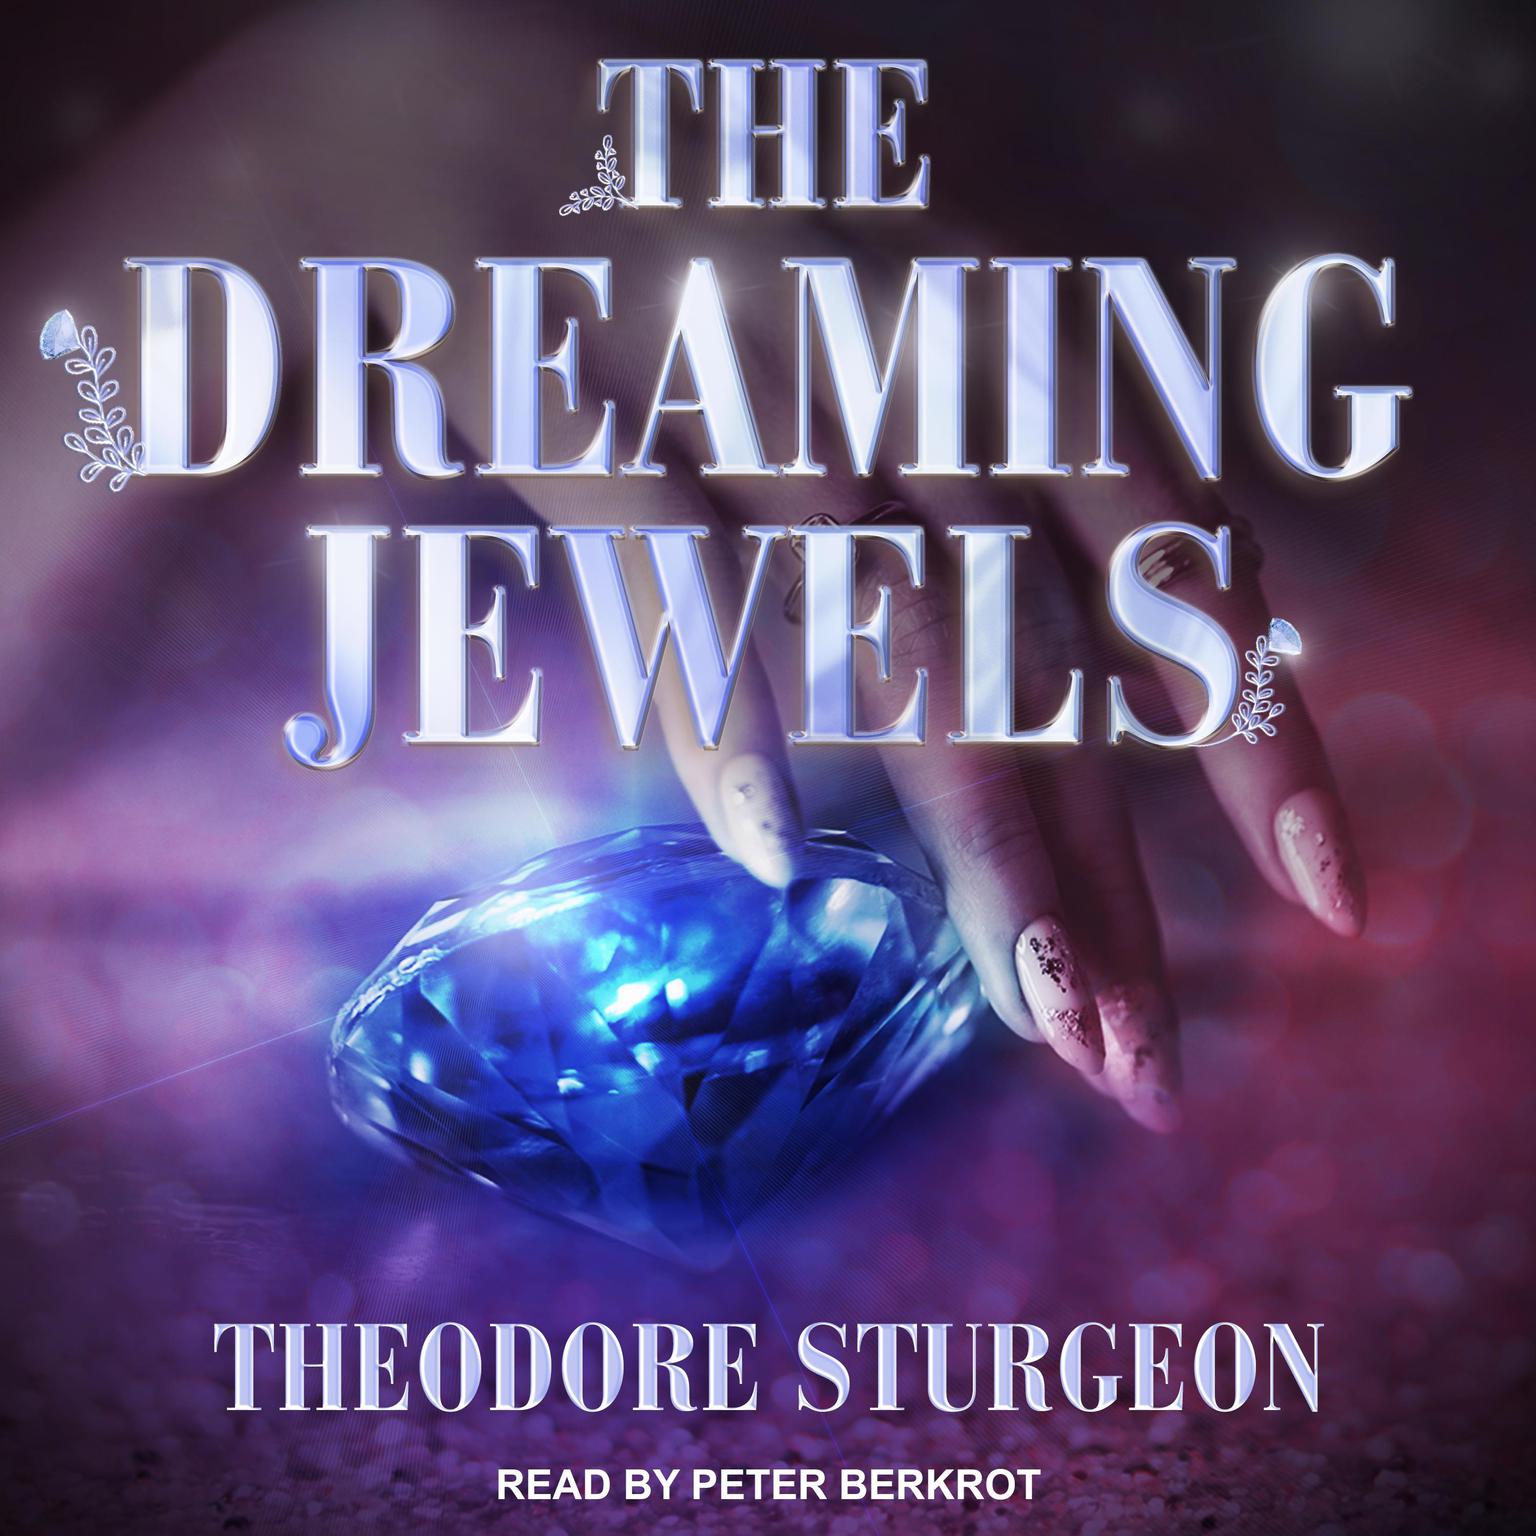 the dreaming jewels by theodore sturgeon